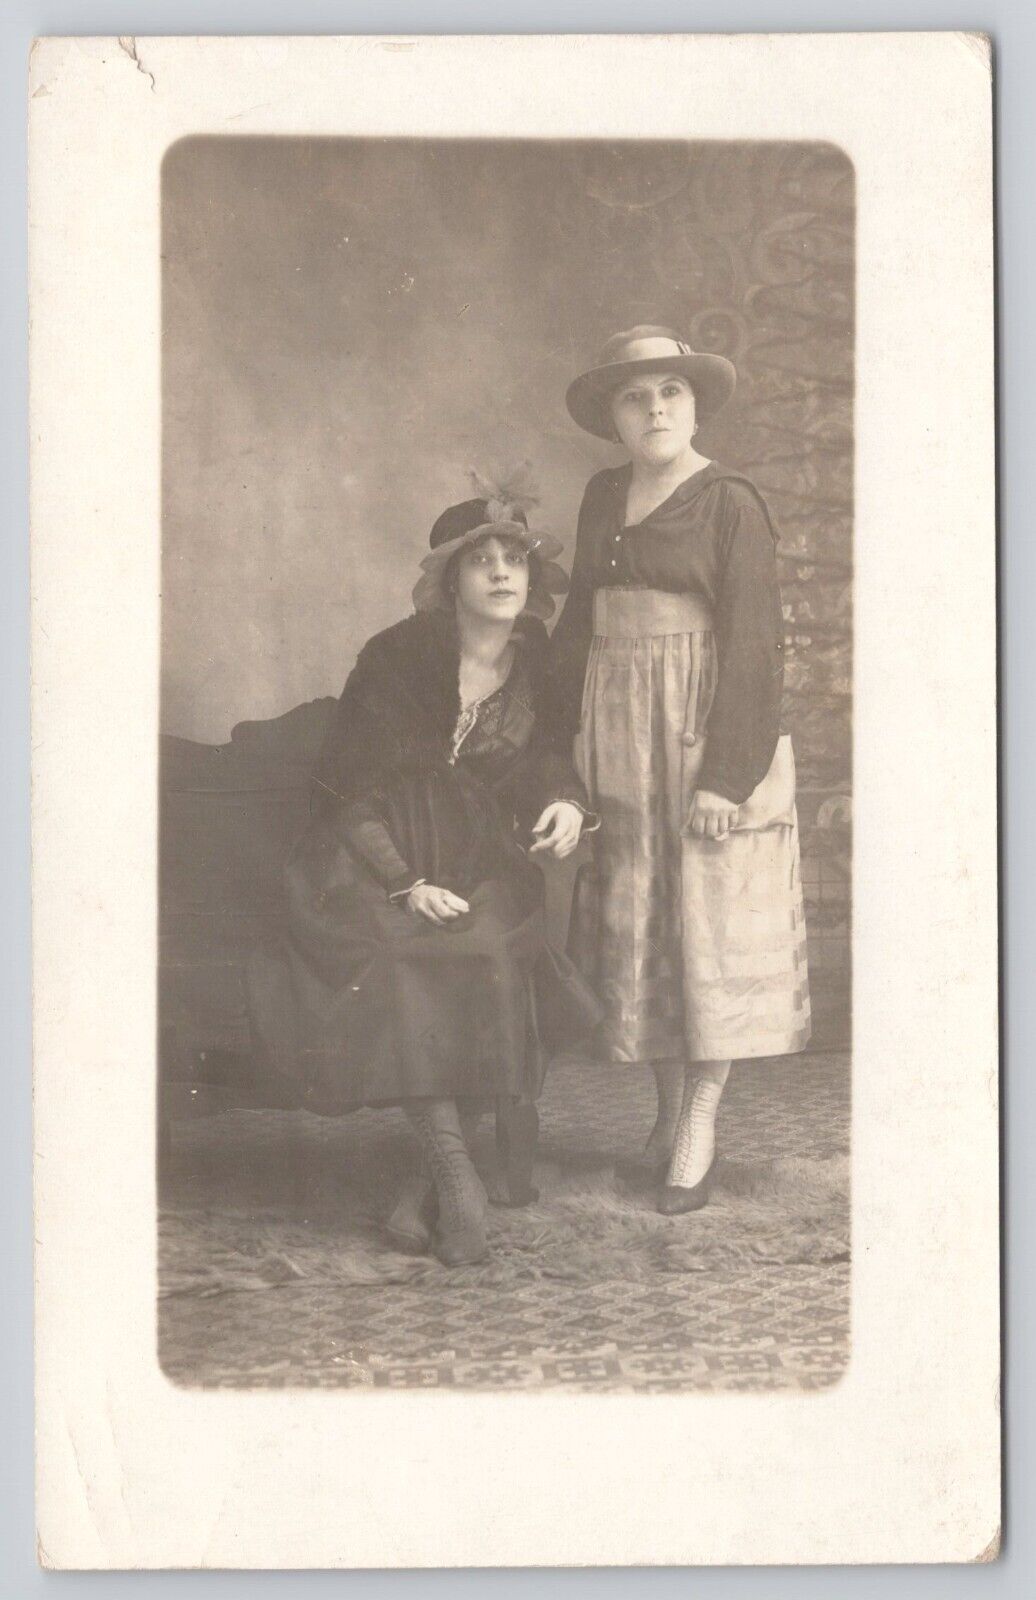 Young Ladies with Fancy Hats Long Dresses Laced Boots c1904-1918 RPPC Postcard